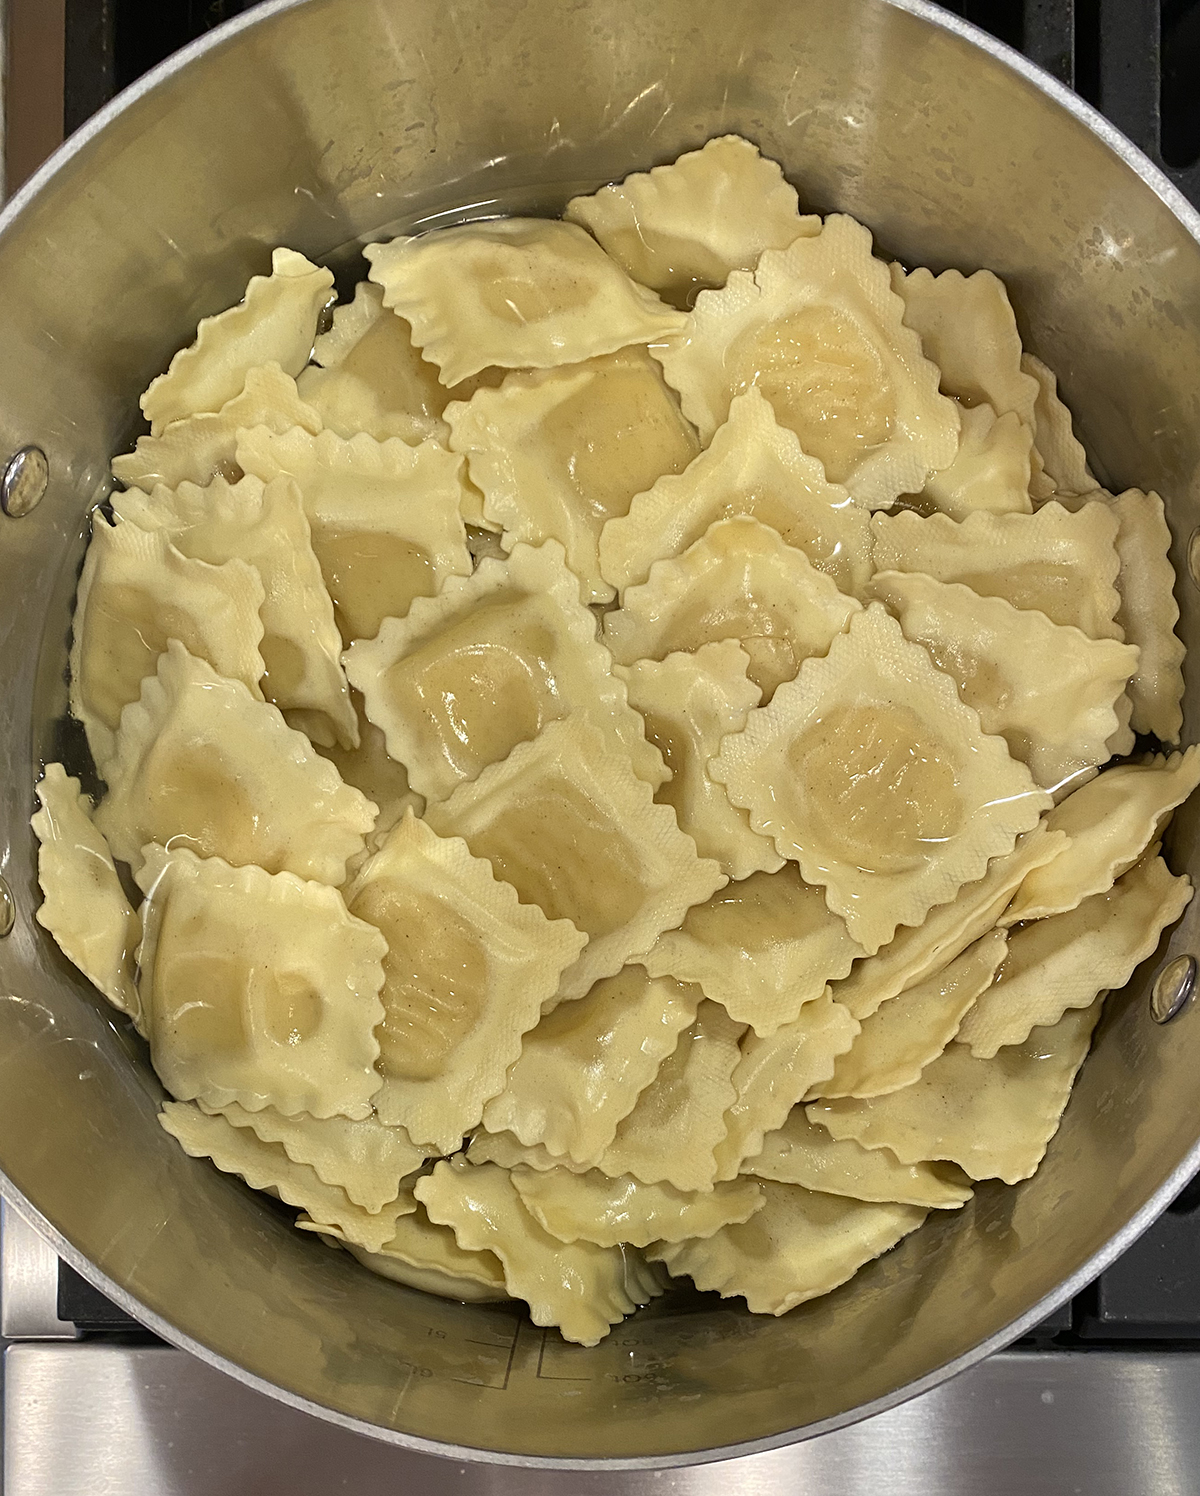 Cooked and drained ravioli in a pot.